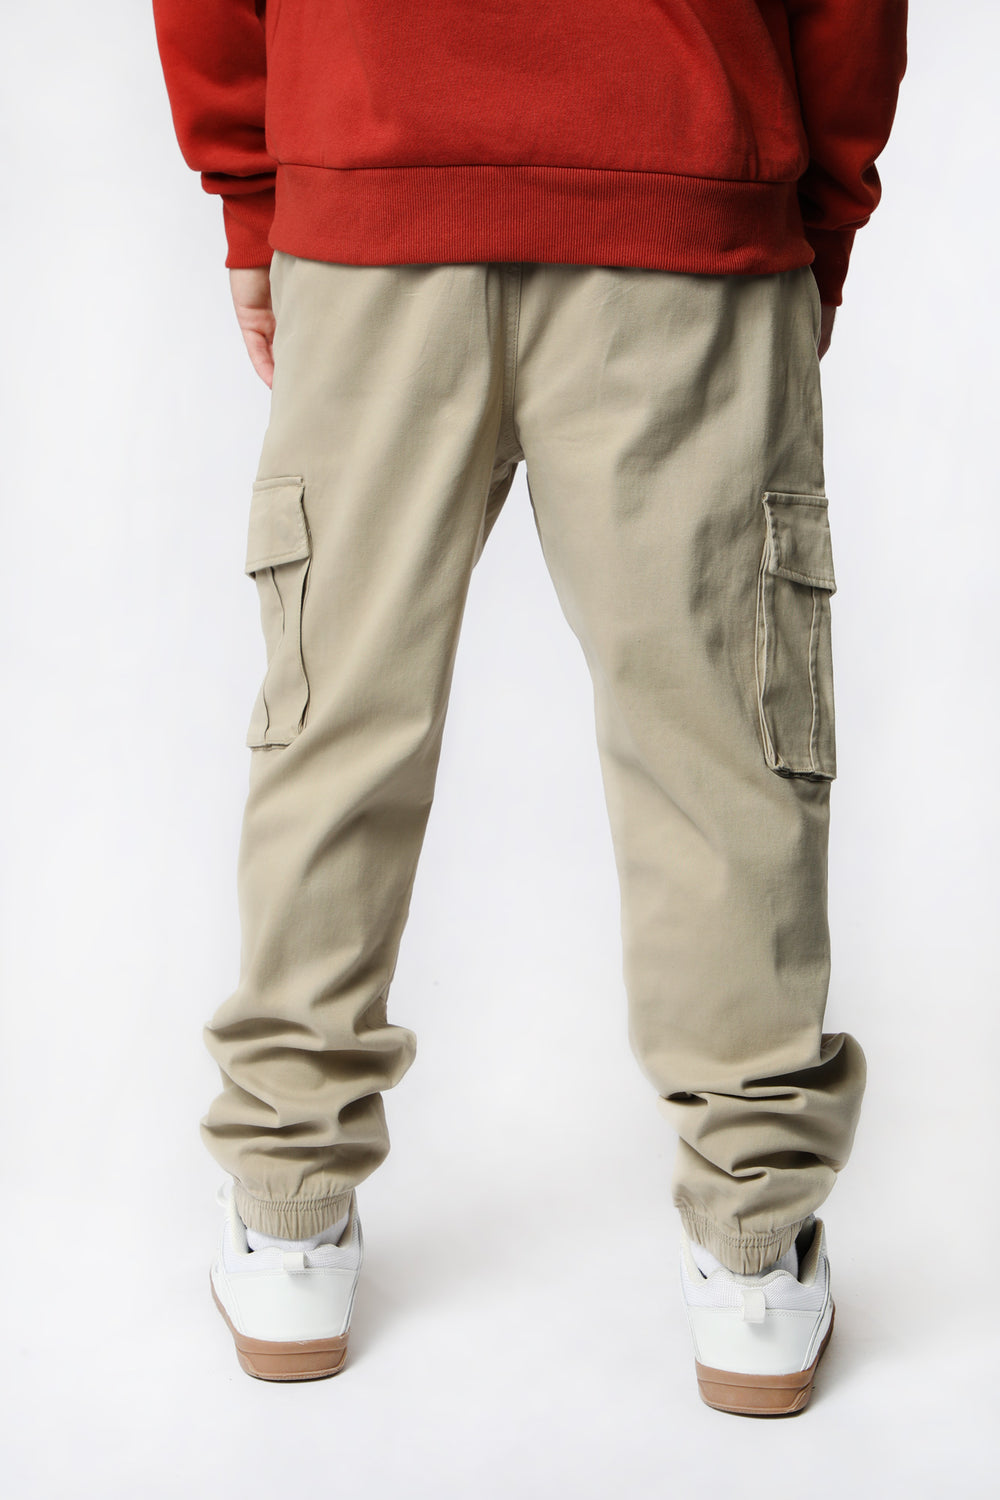 West49 Mens Twill Cargo Jogger